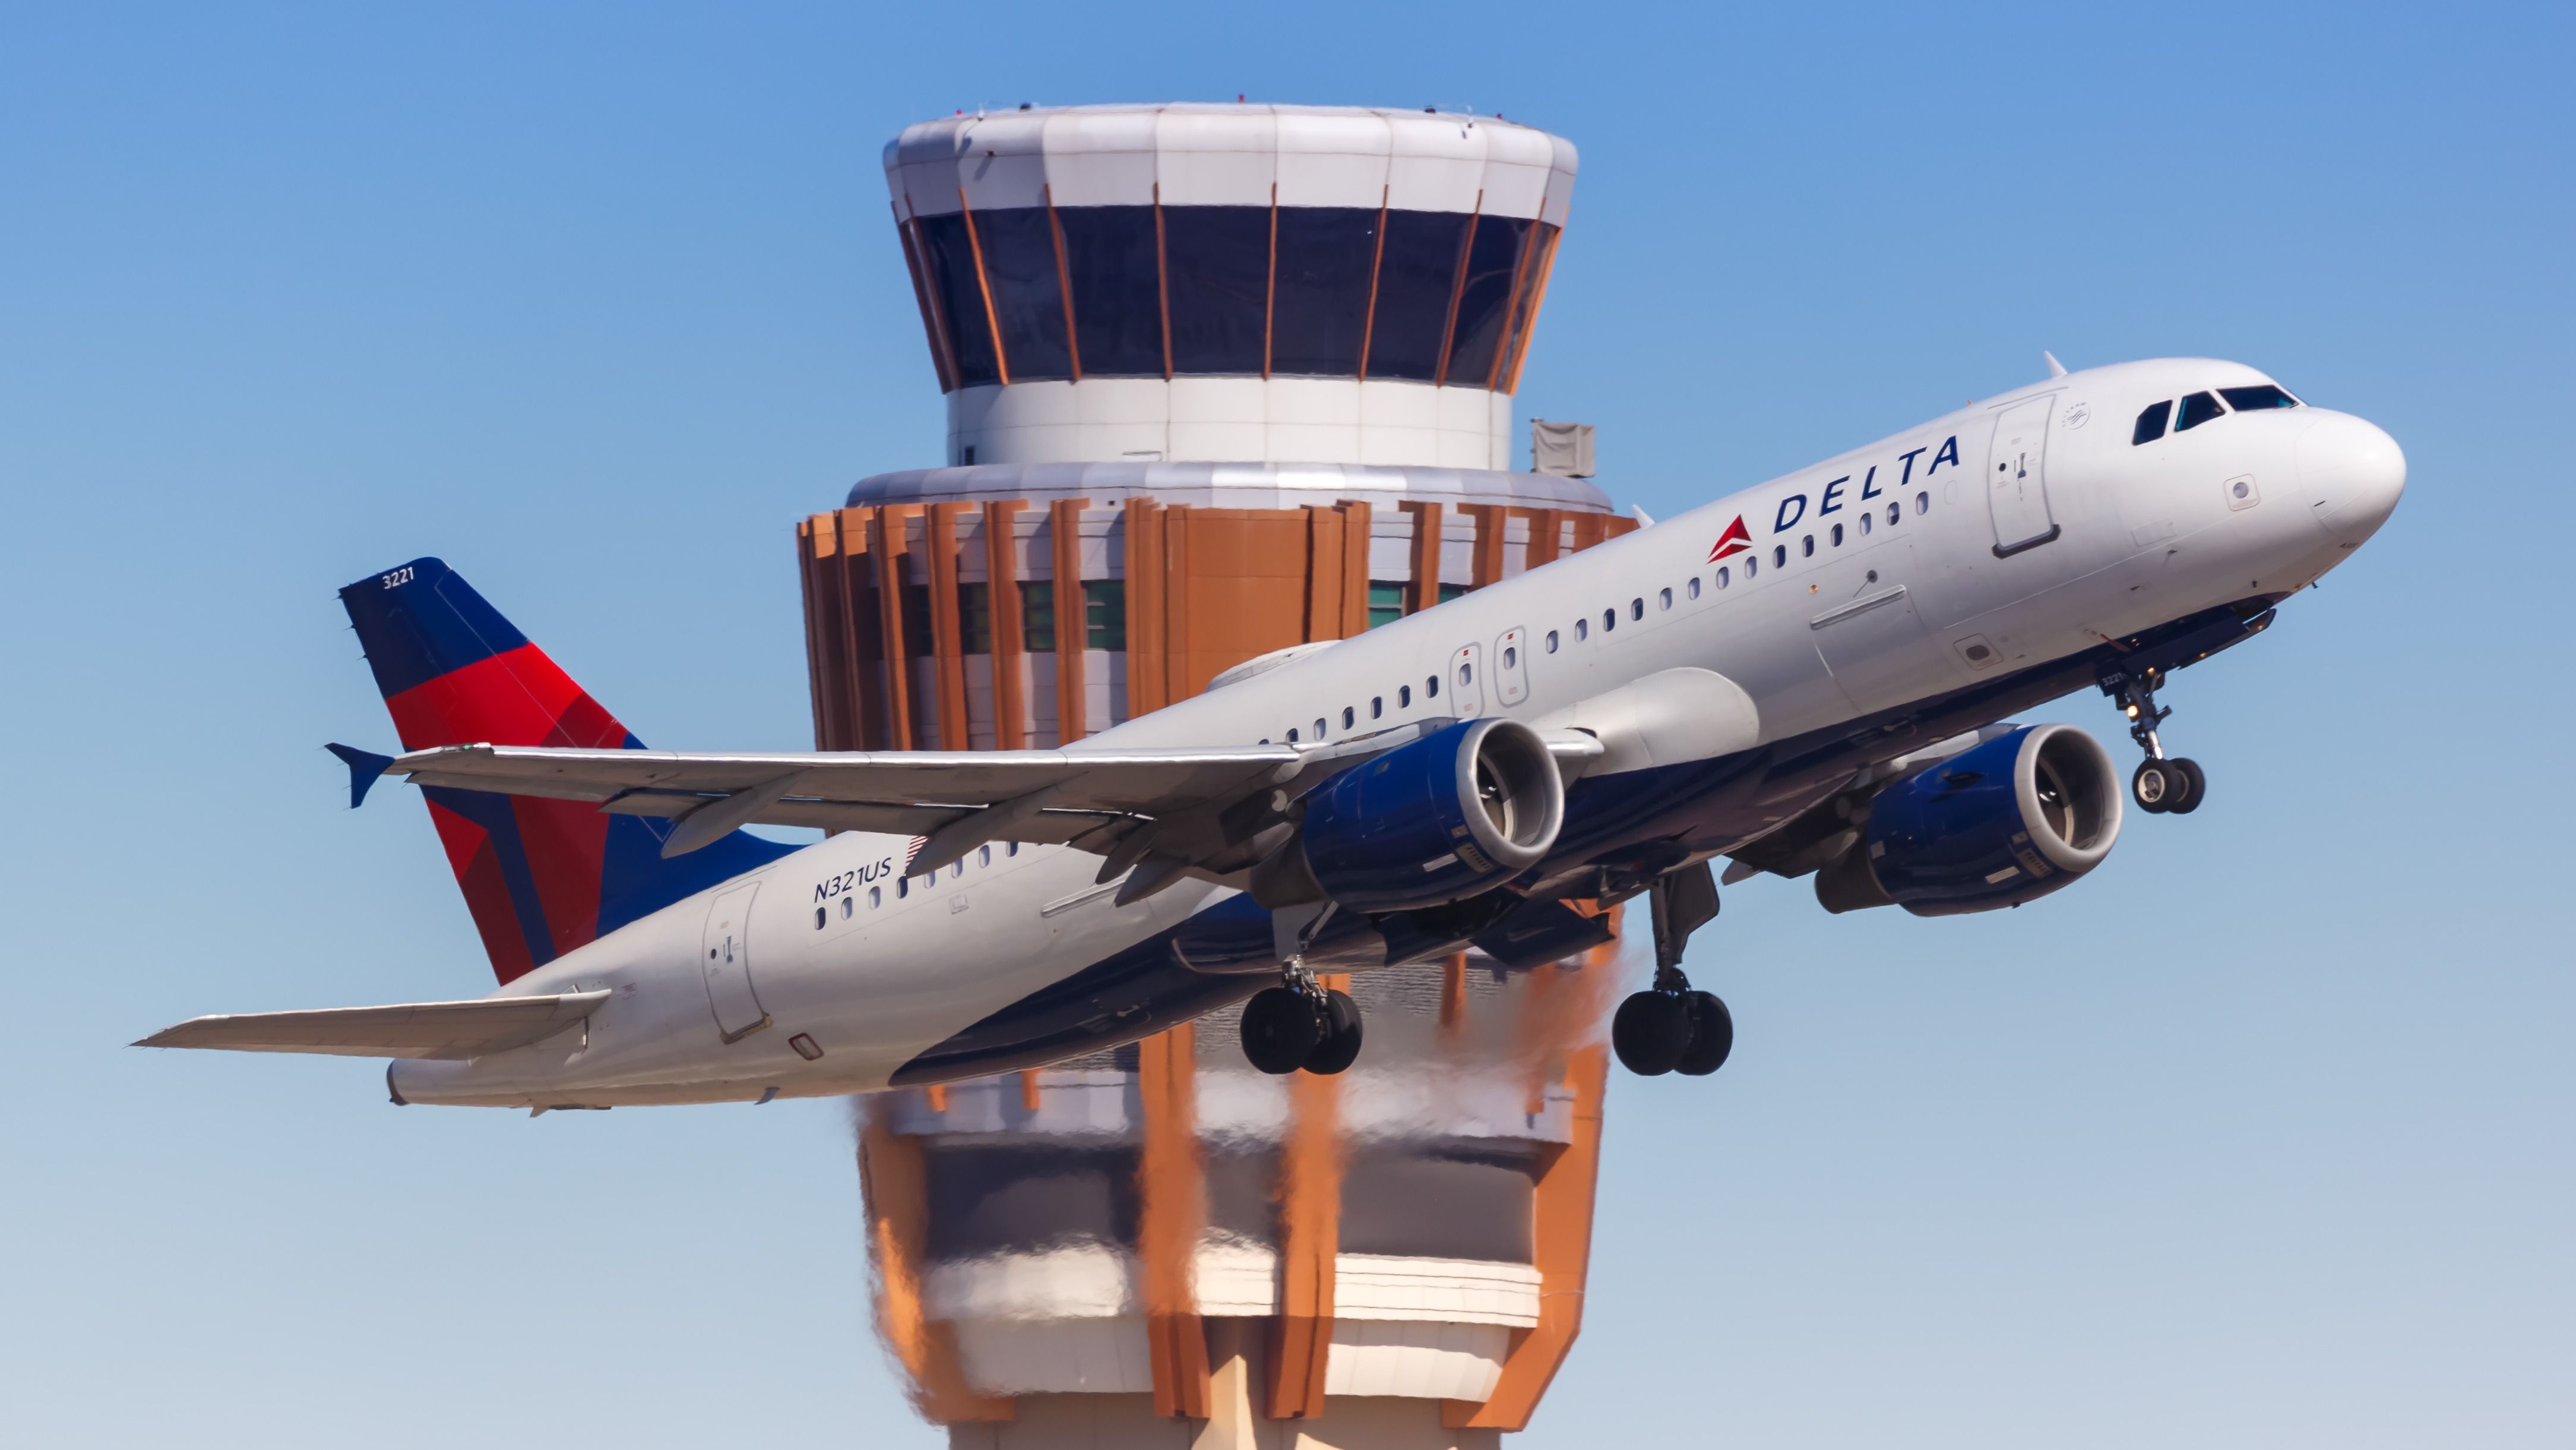 Delta Air Lines Airbus A320 at Phoenix Airport (PHX)